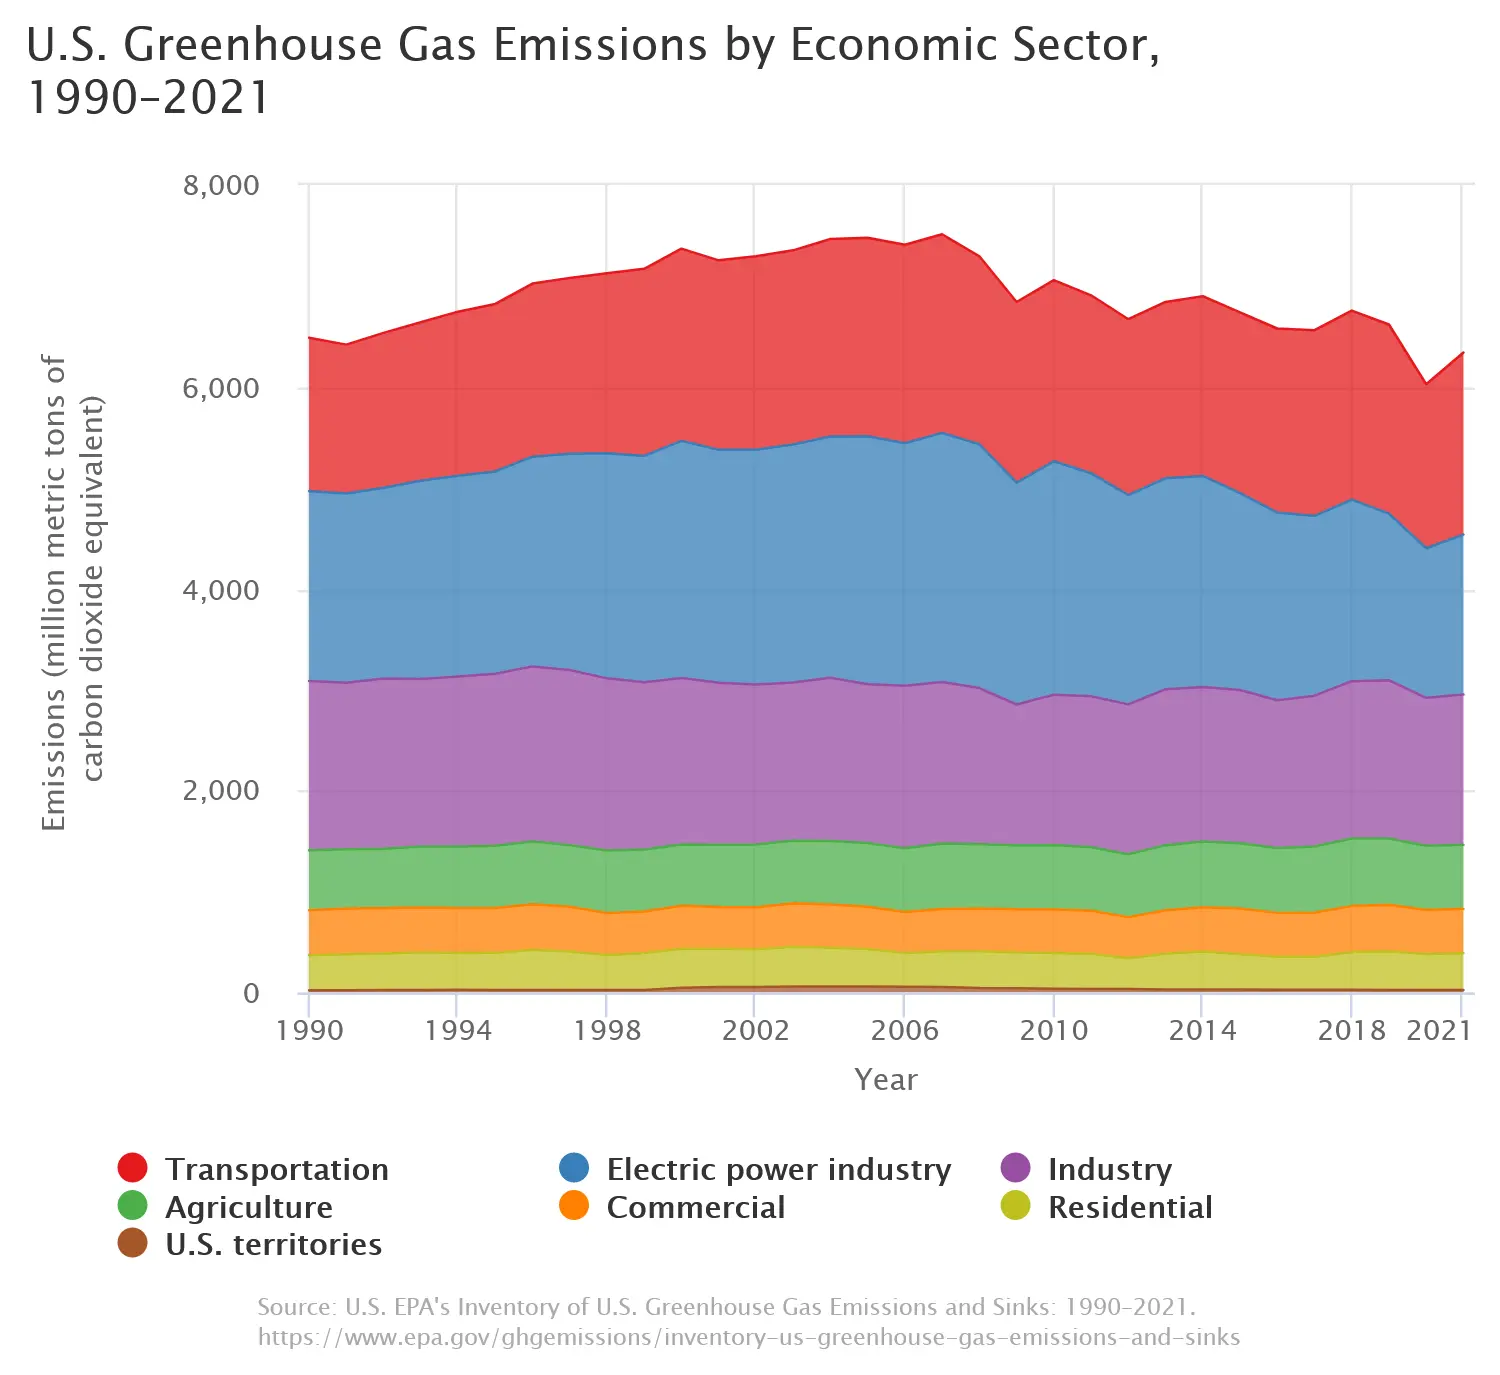 Graph of US greenhouse gas emissions by economic sector, 1990-2021.  Shows emissions rising until ~2006, and dropping thereafter, mostly due to electric generation emissions cuts